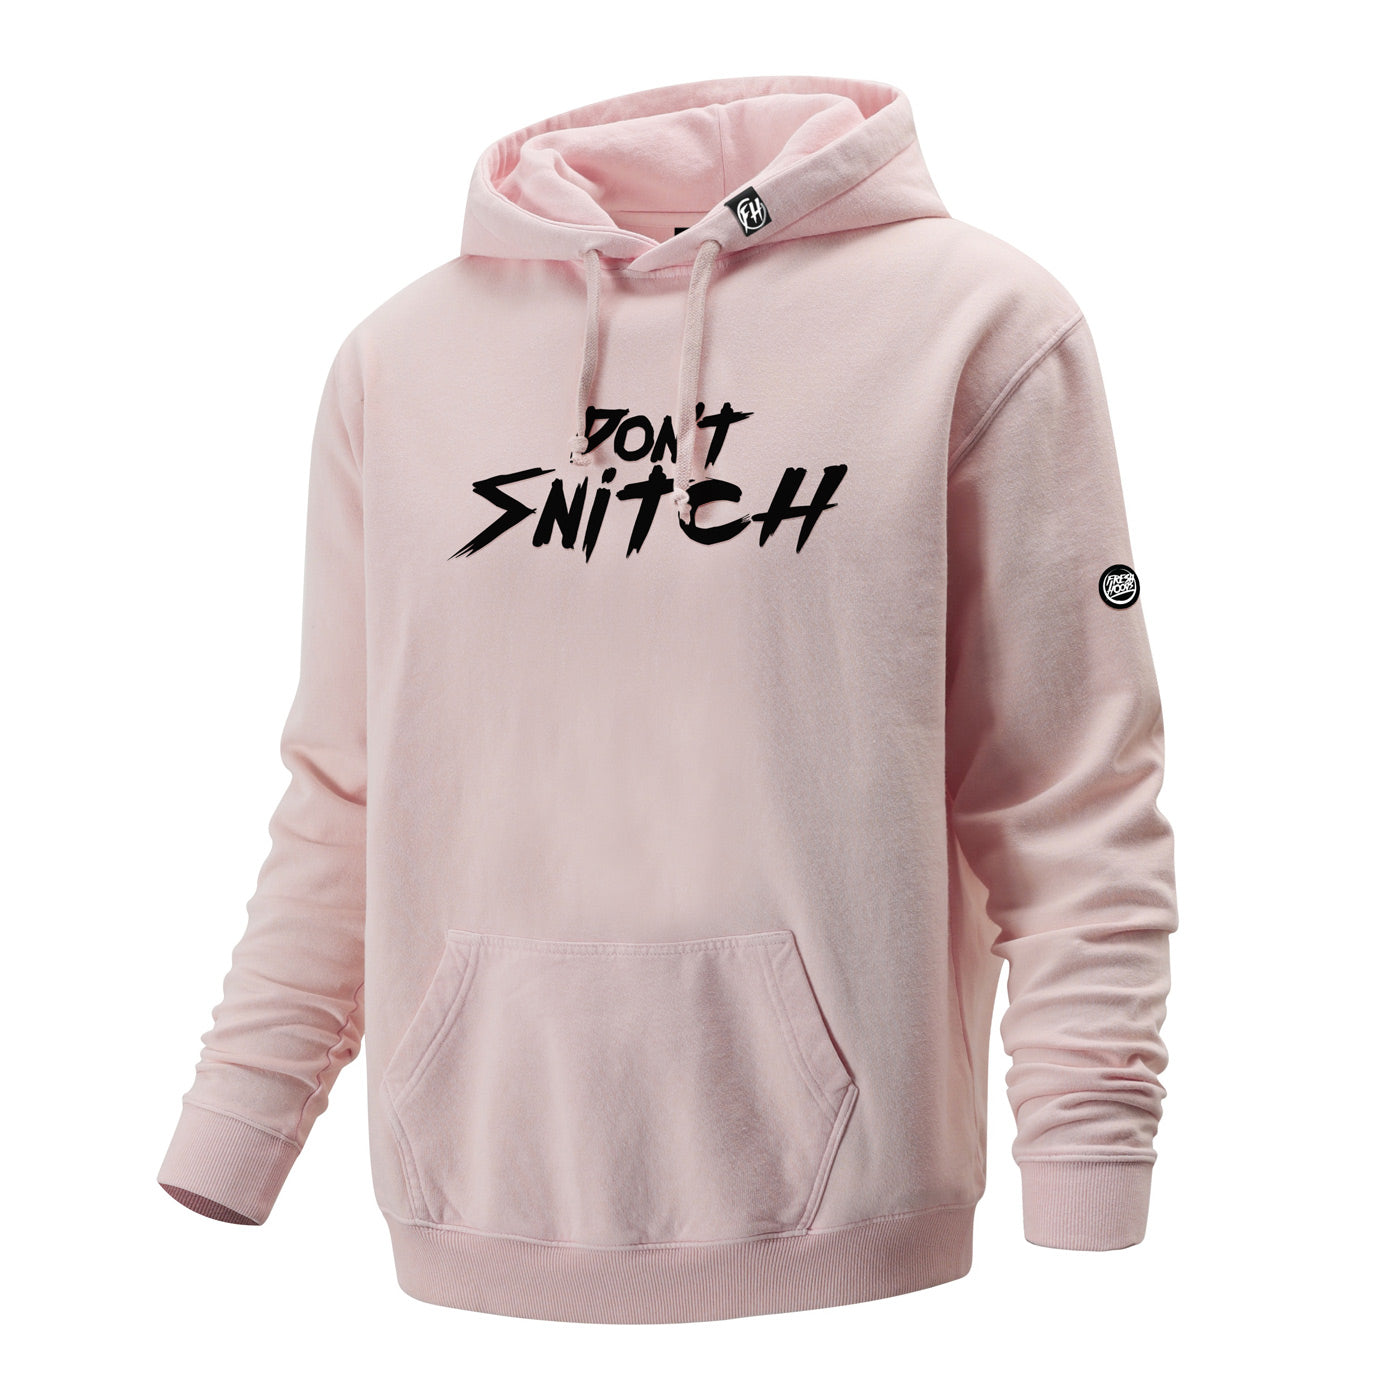 Don't Snitch Hoodie